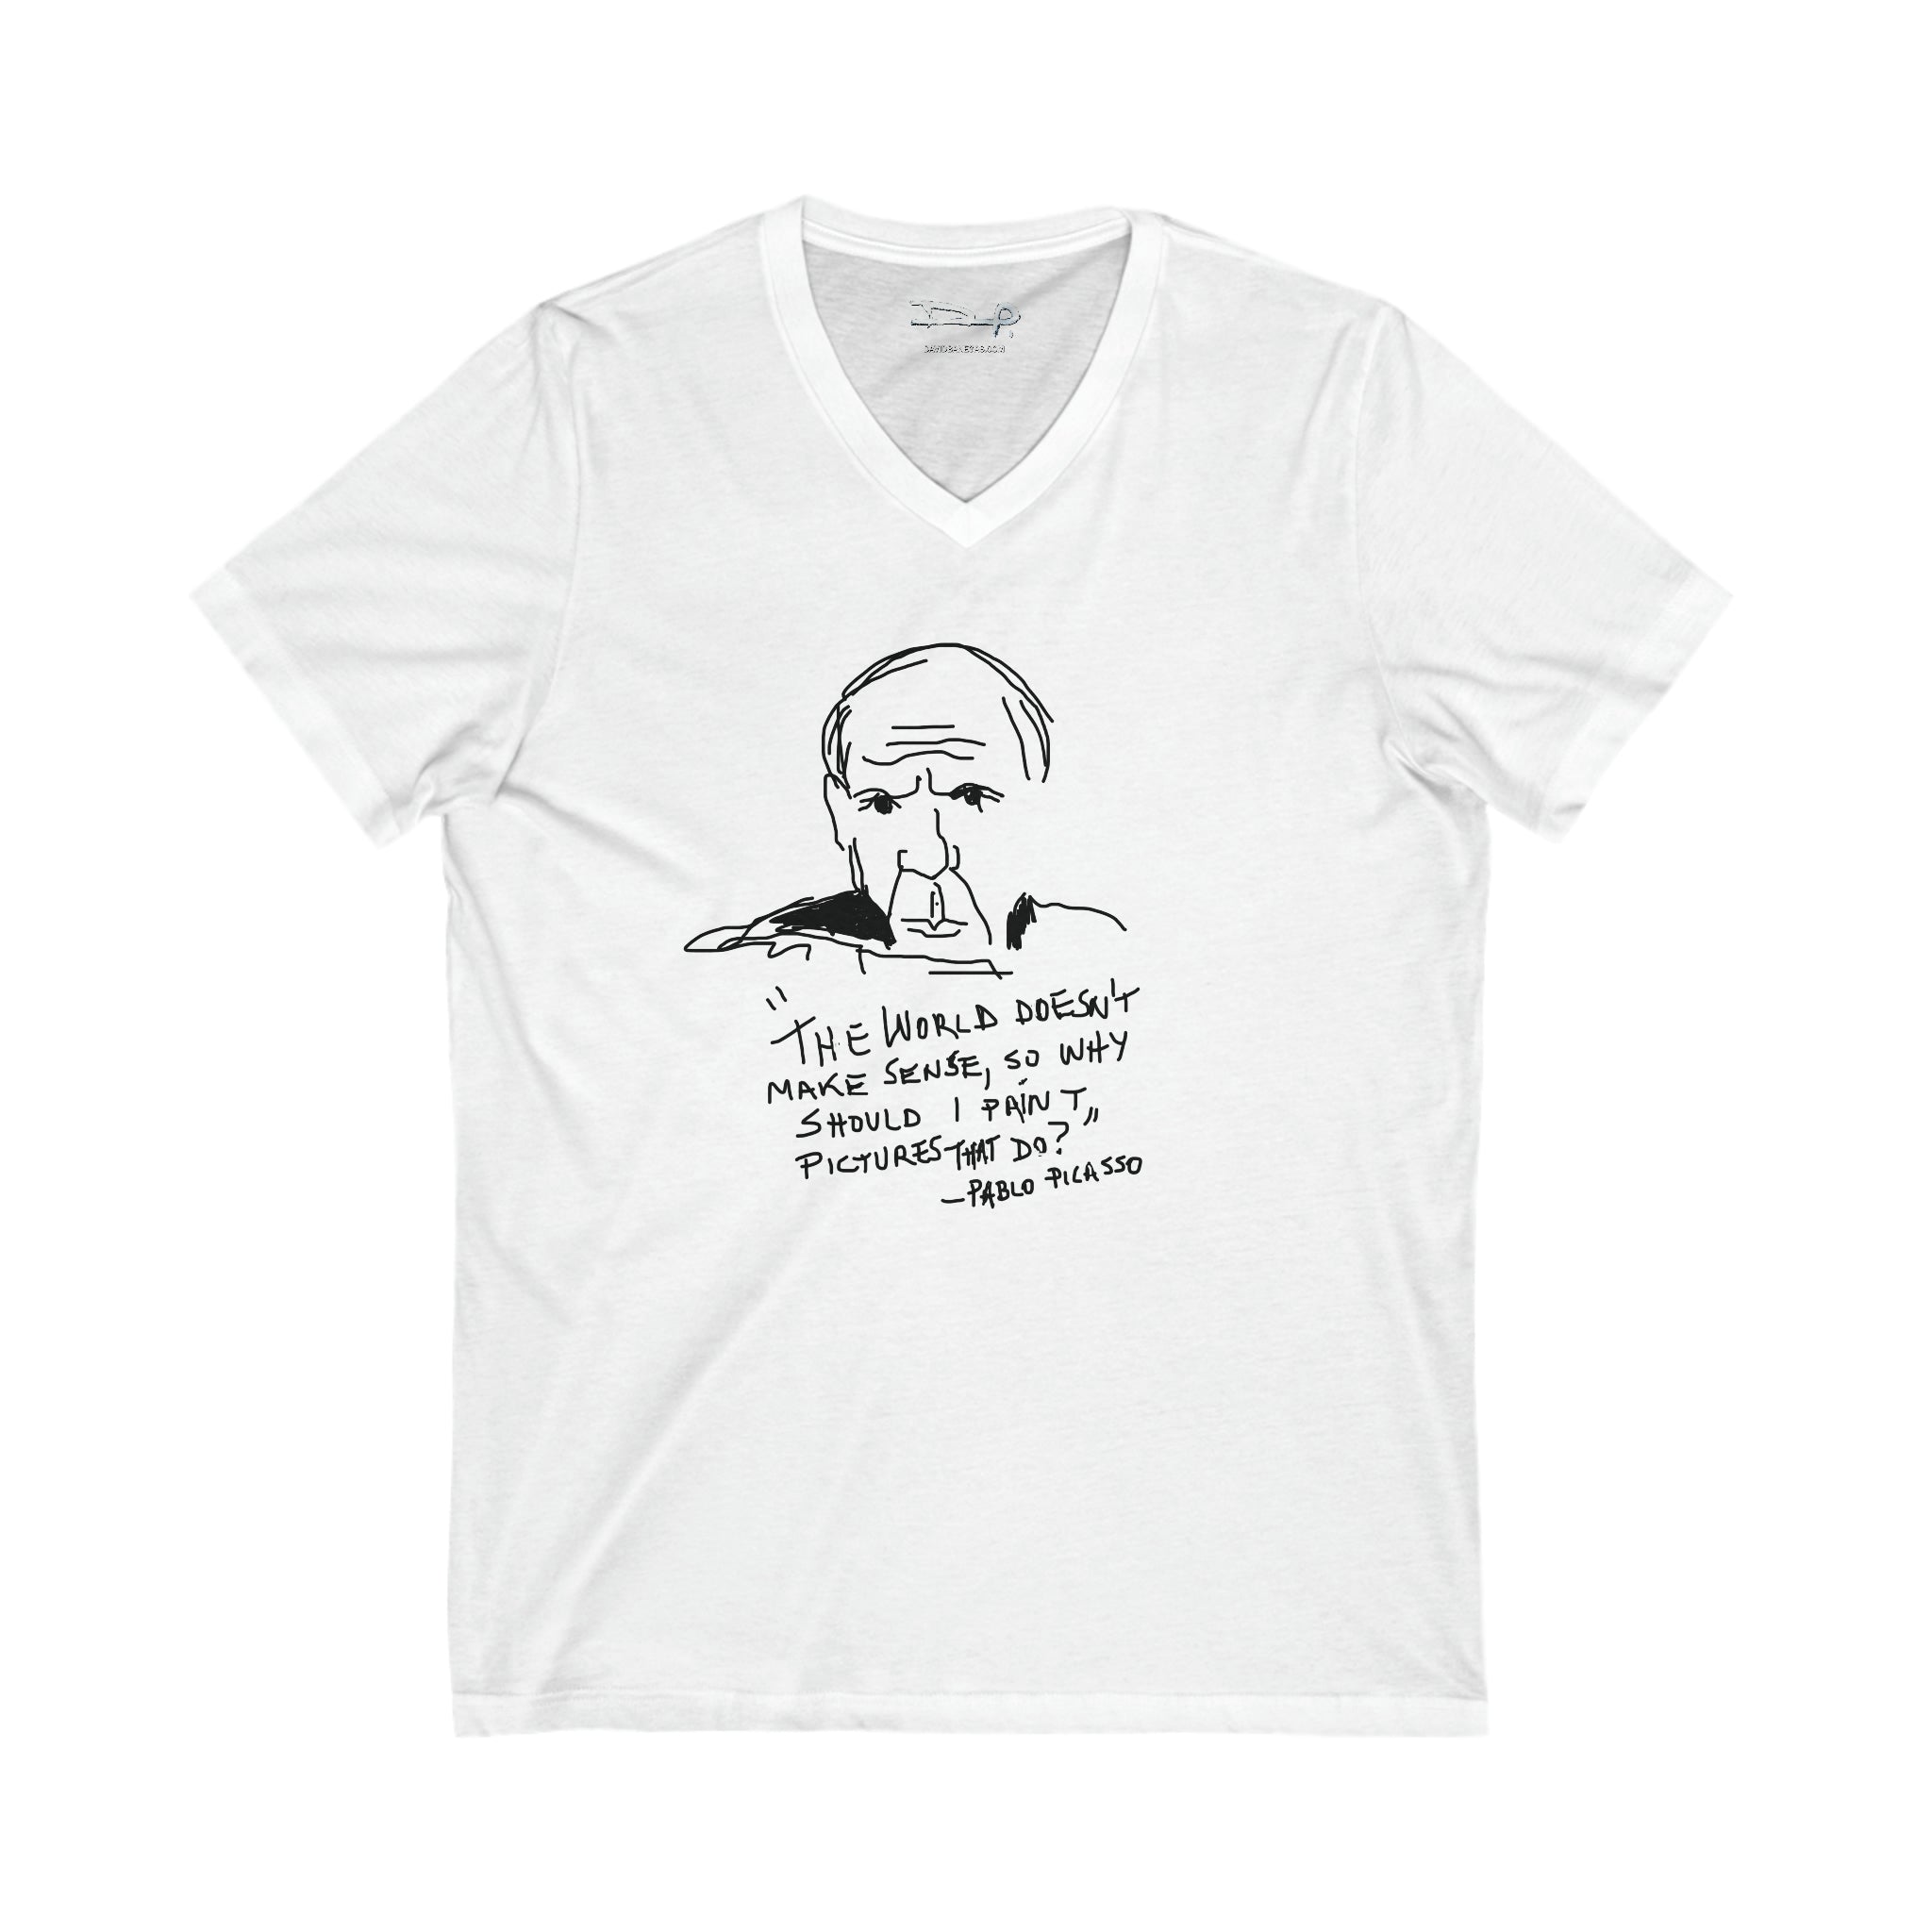 PICASSO T-SHIRT